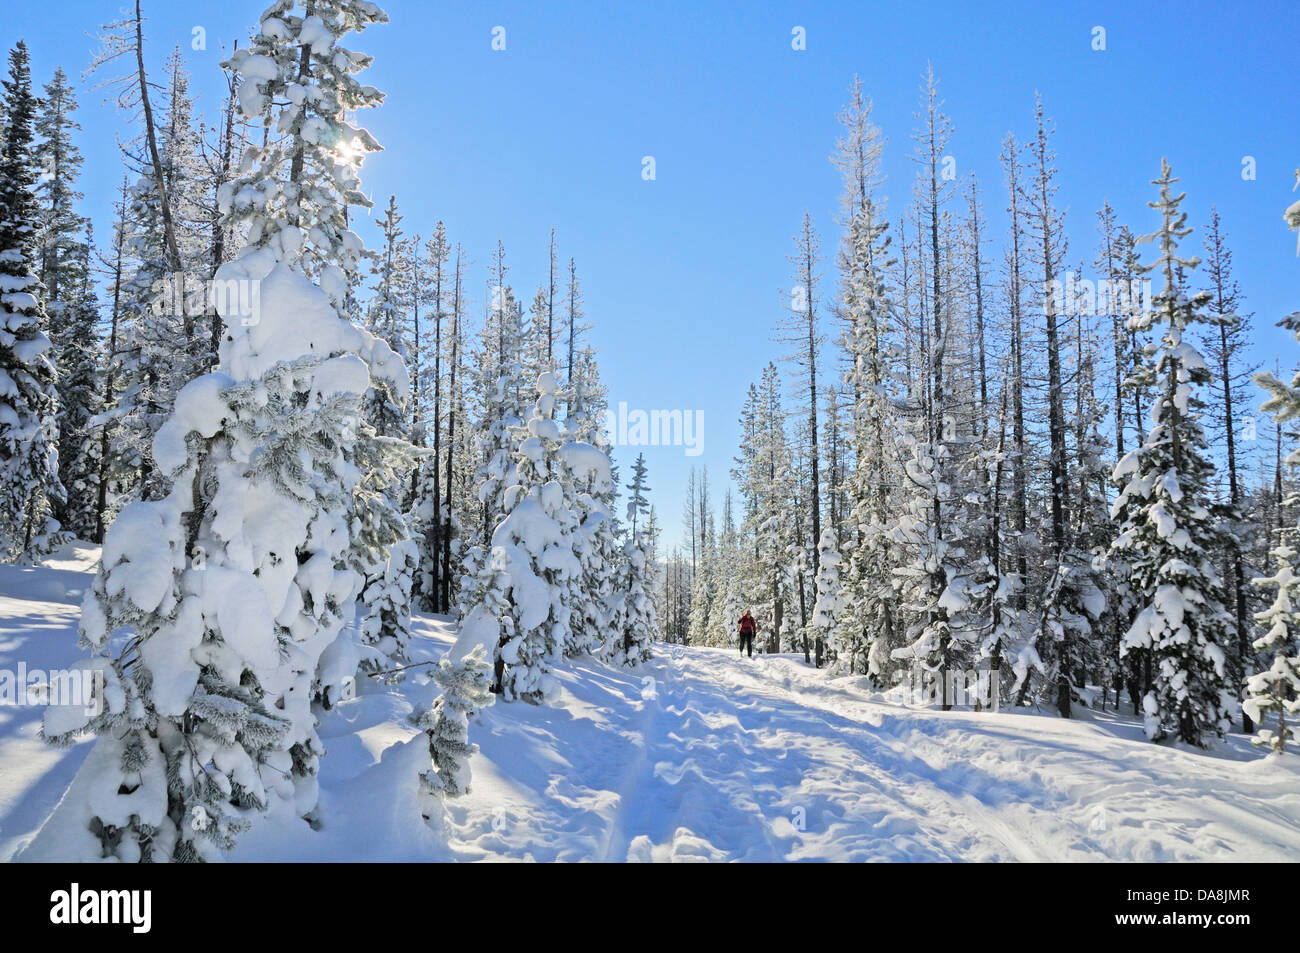 USA, United States, America, Oregon, Bend, North America, Deschutes, County, Cascades mountains, National Forest, winter, sport, Stock Photo